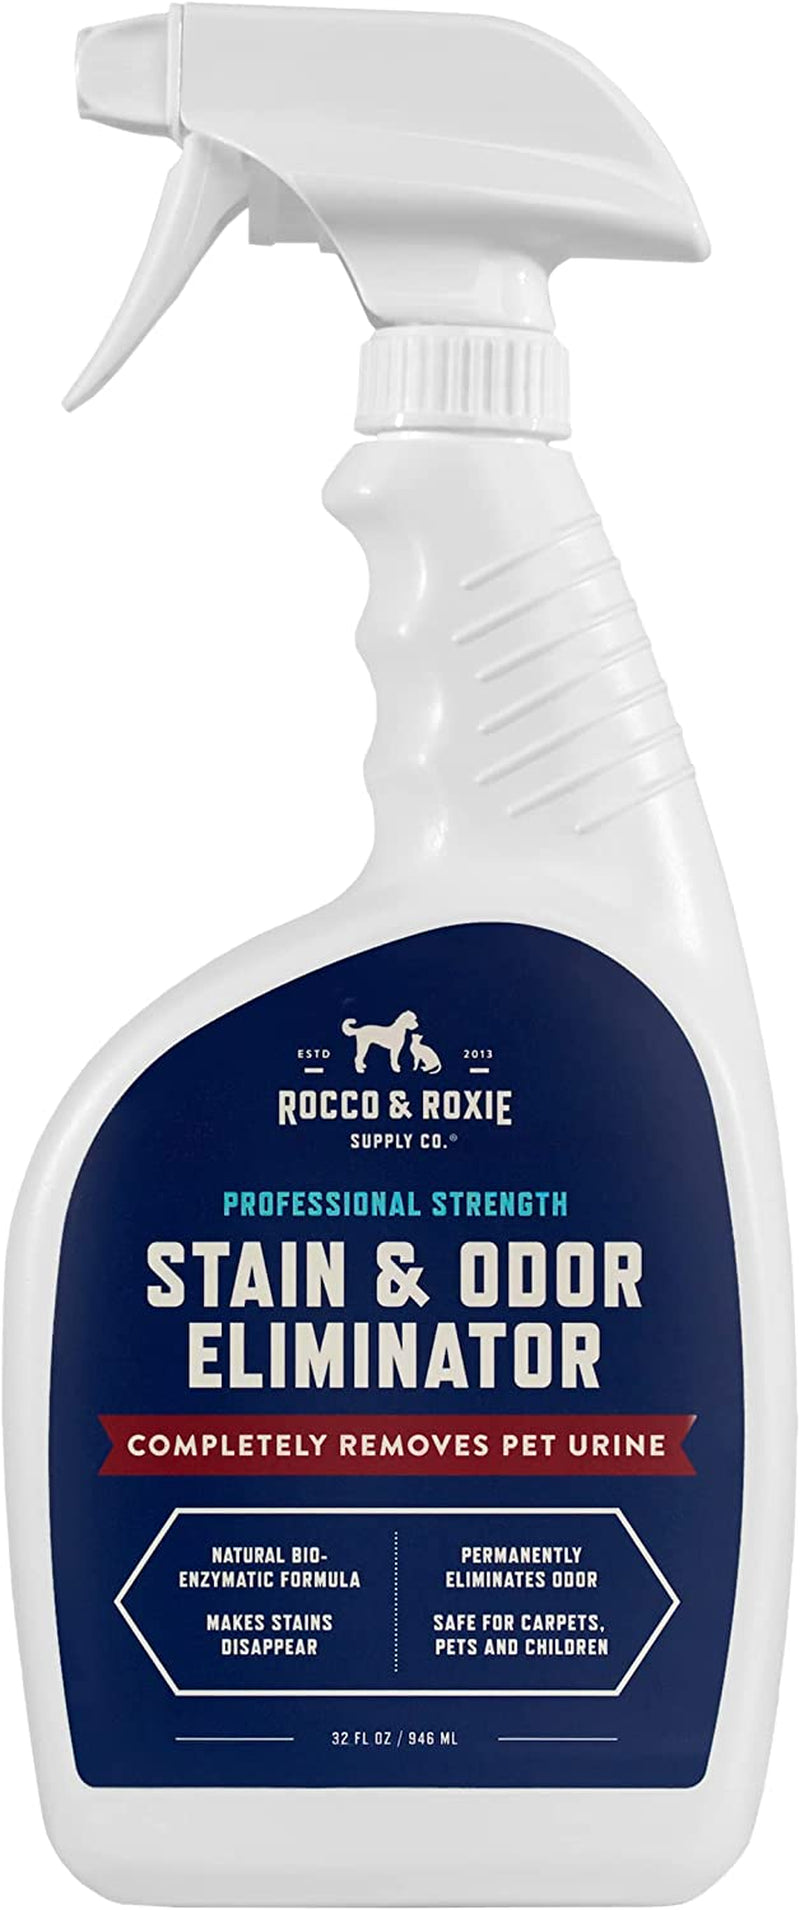 Stain & Odor Eliminator for Strong Odor, 32Oz Enzyme Pet Odor Eliminator for Home, Carpet Stain Remover for Cats & Dog Pee, Enzymatic Cat Urine Destroyer, Carpet Cleaner Spray